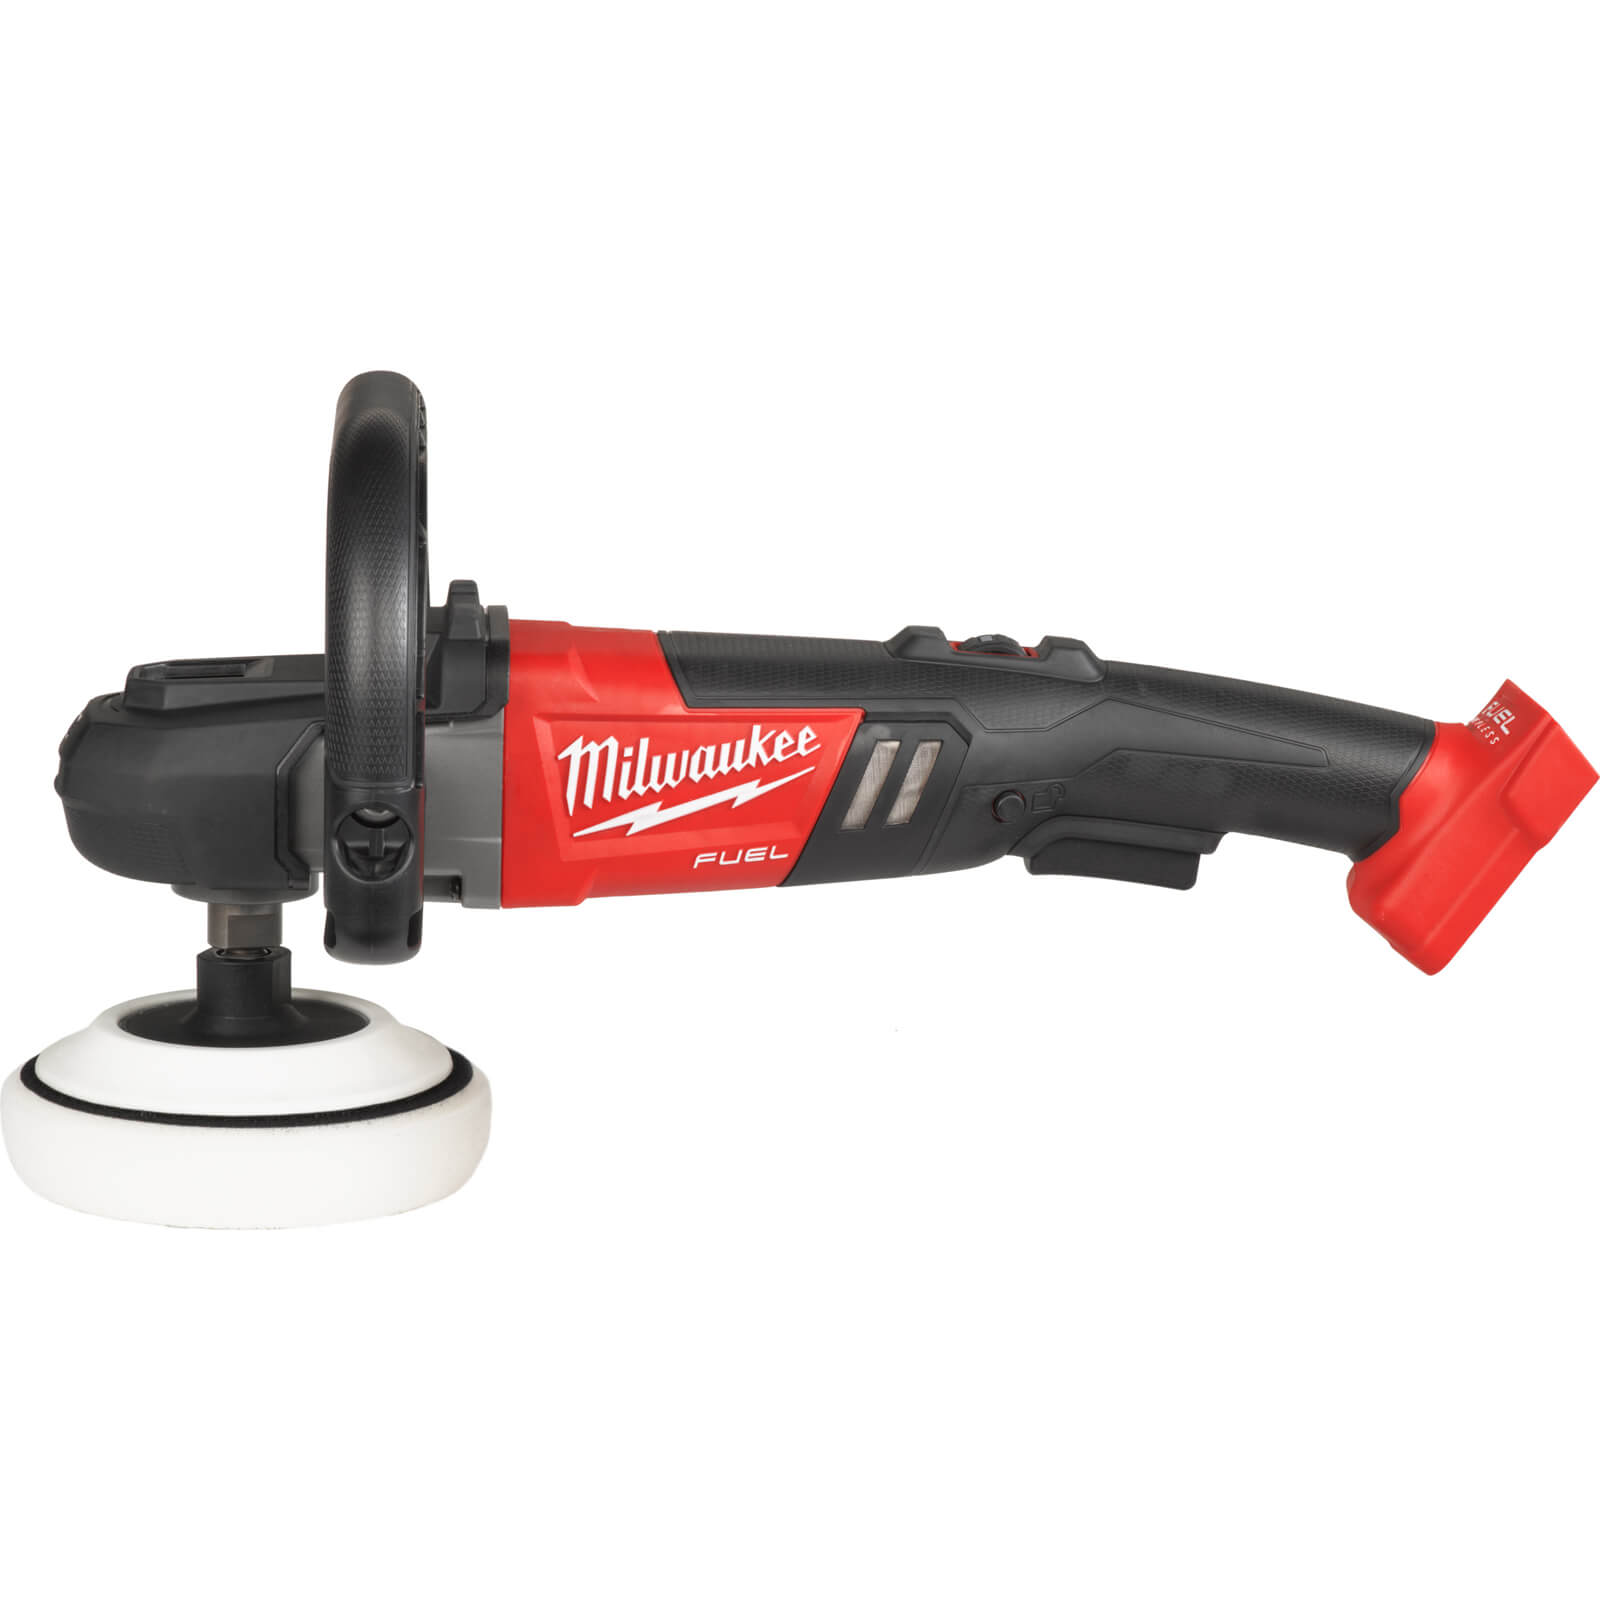 Image of Milwaukee M18 FAP180 Fuel 18v Cordless Brushless Polisher 180mm No Batteries No Charger No Case